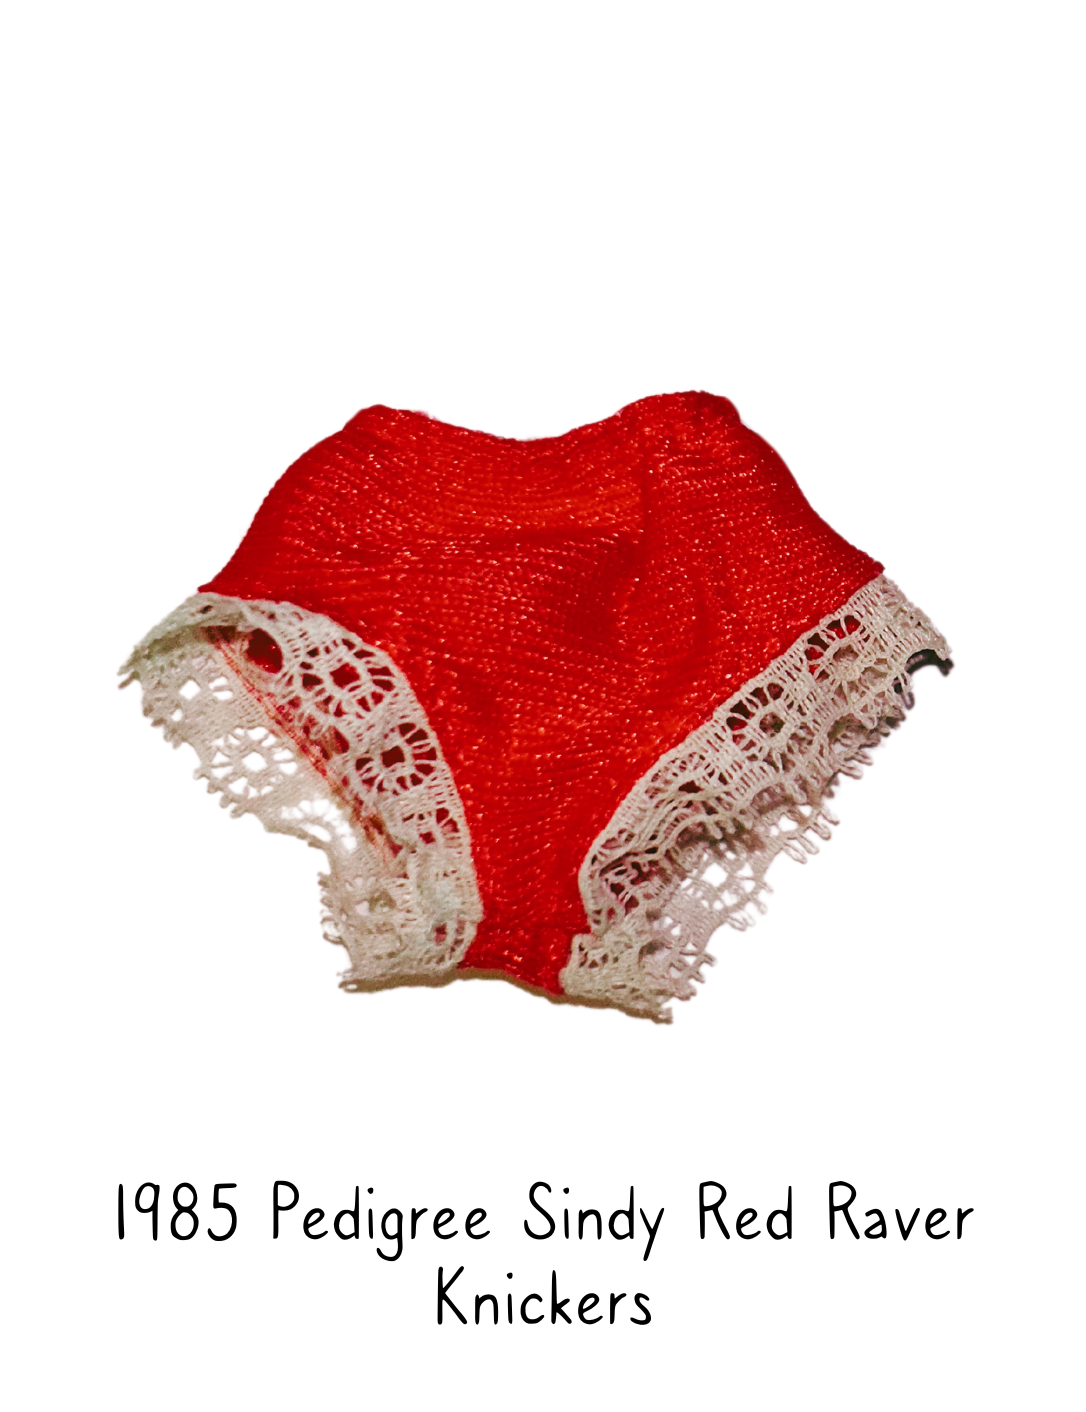 1985 Pedigree Sindy Red Raver Lingerie Knickers